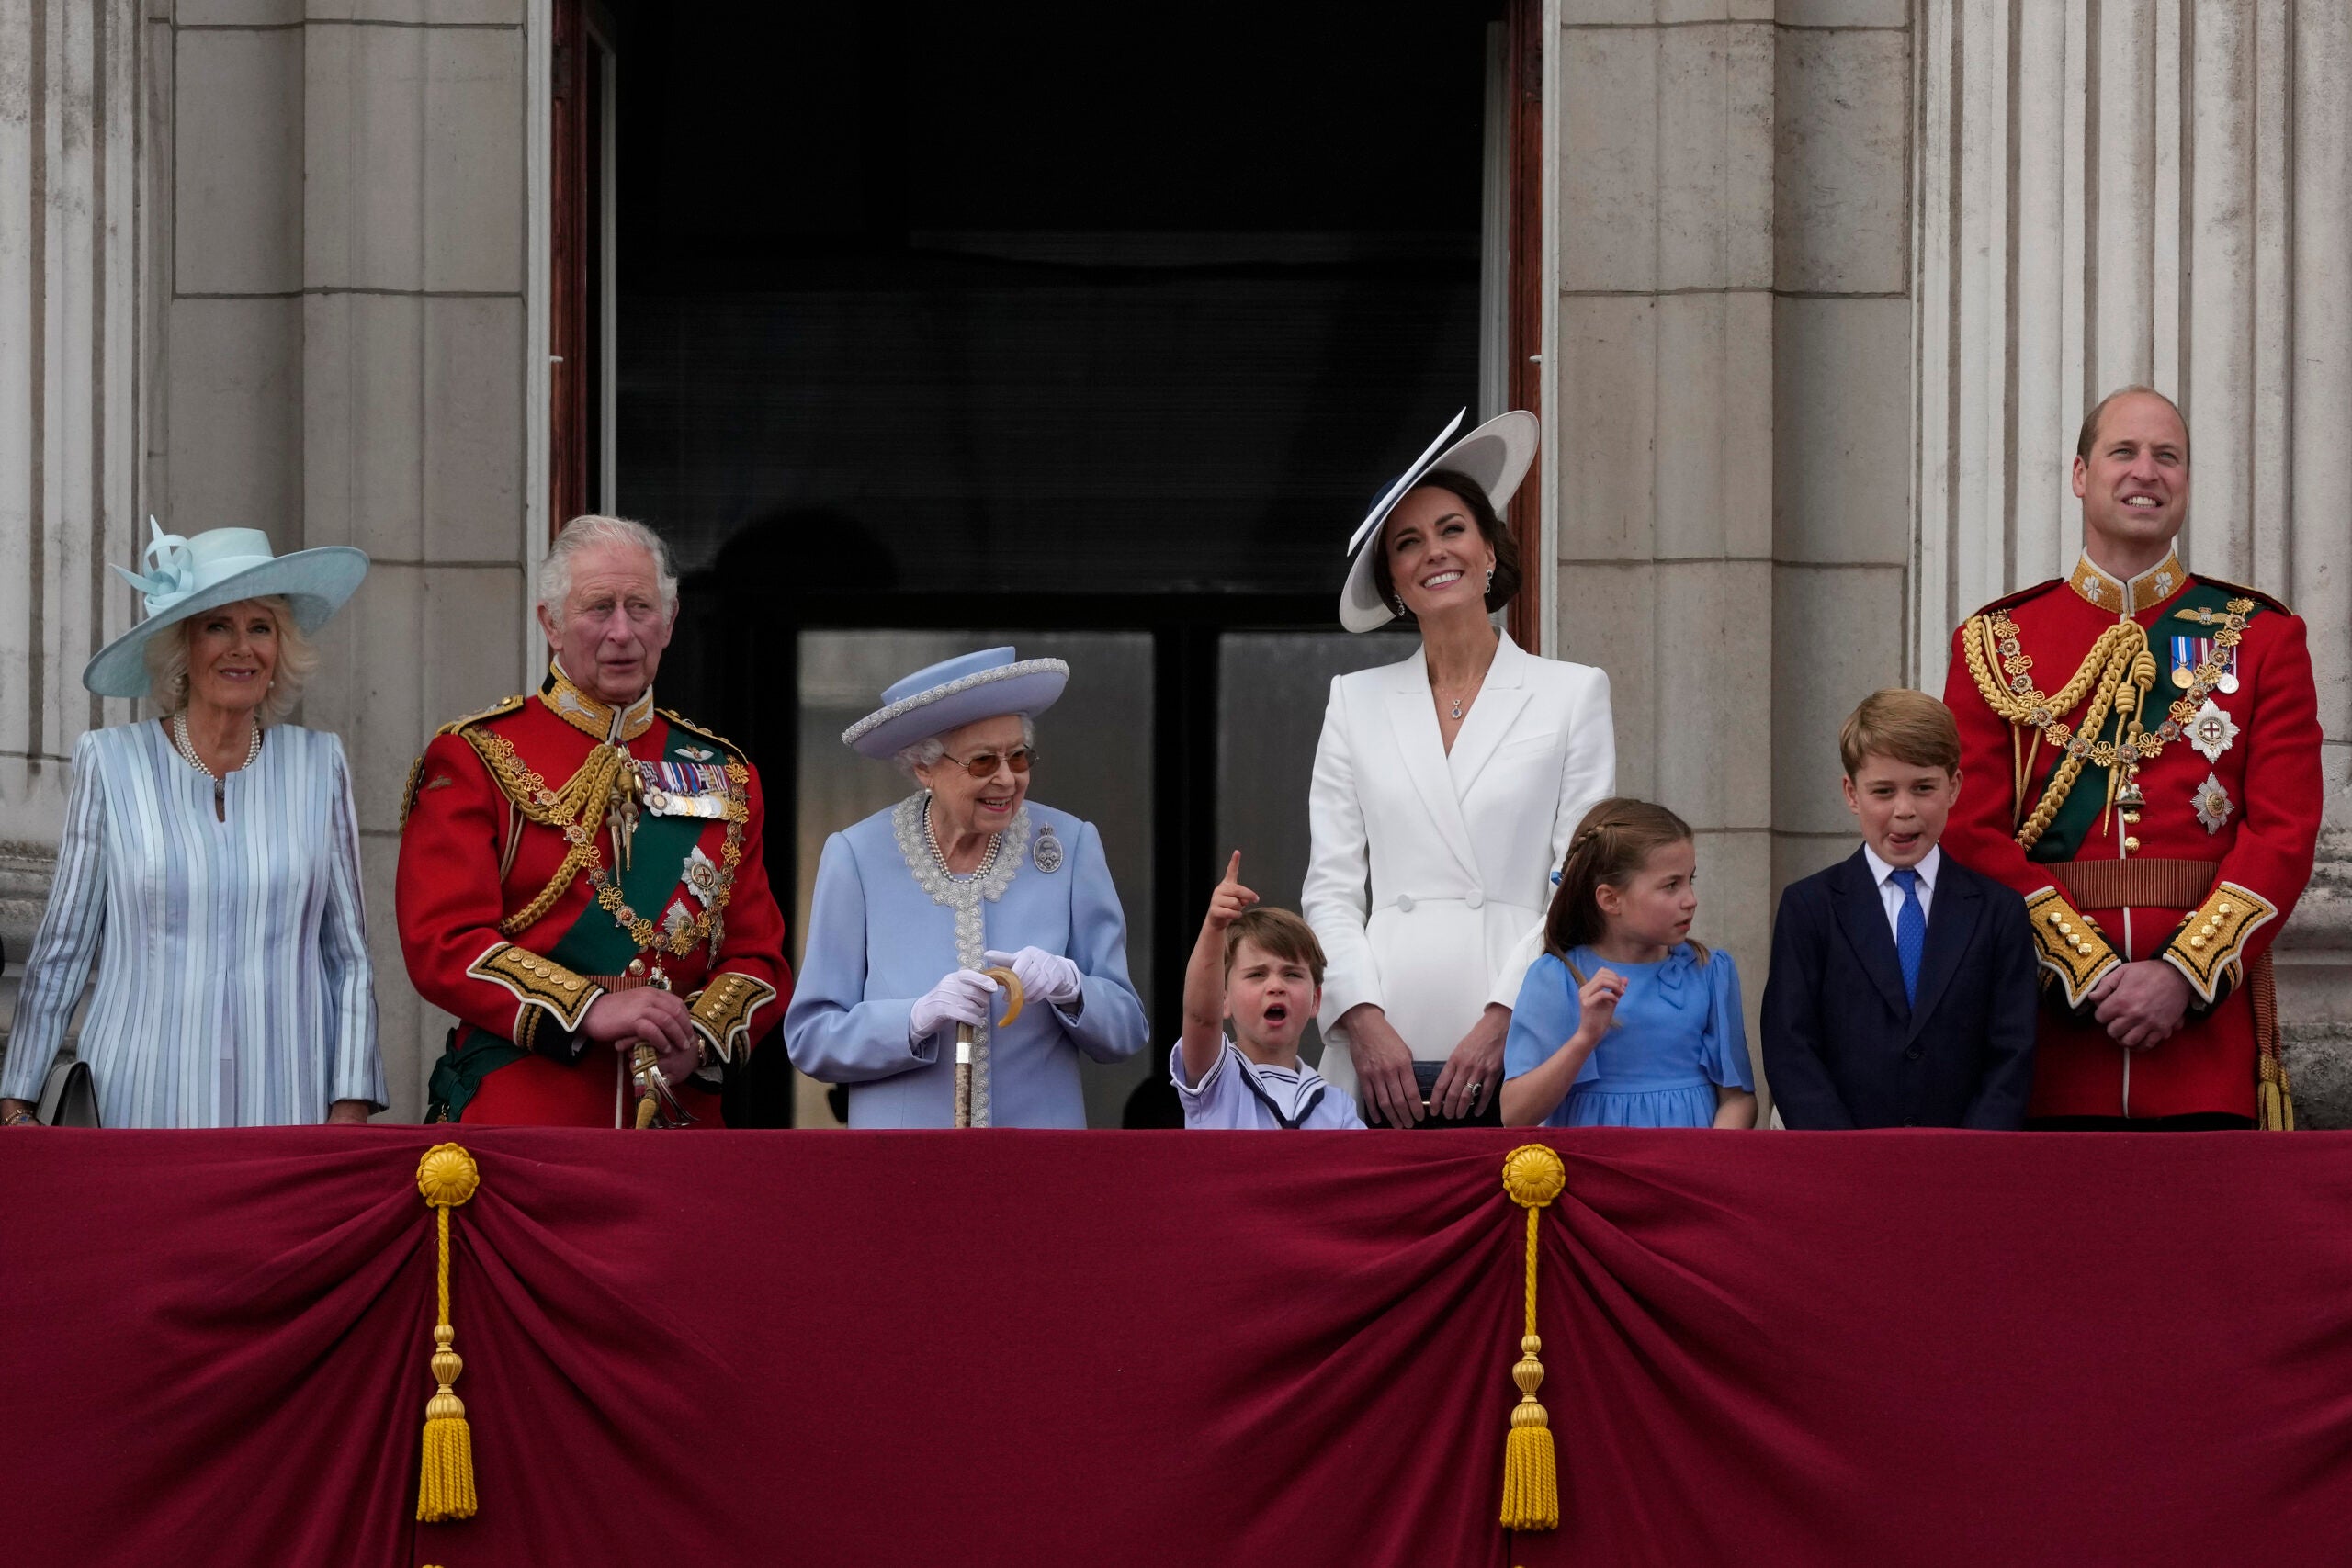 King Charles III: Formal steps after instant shift from UK queen to king